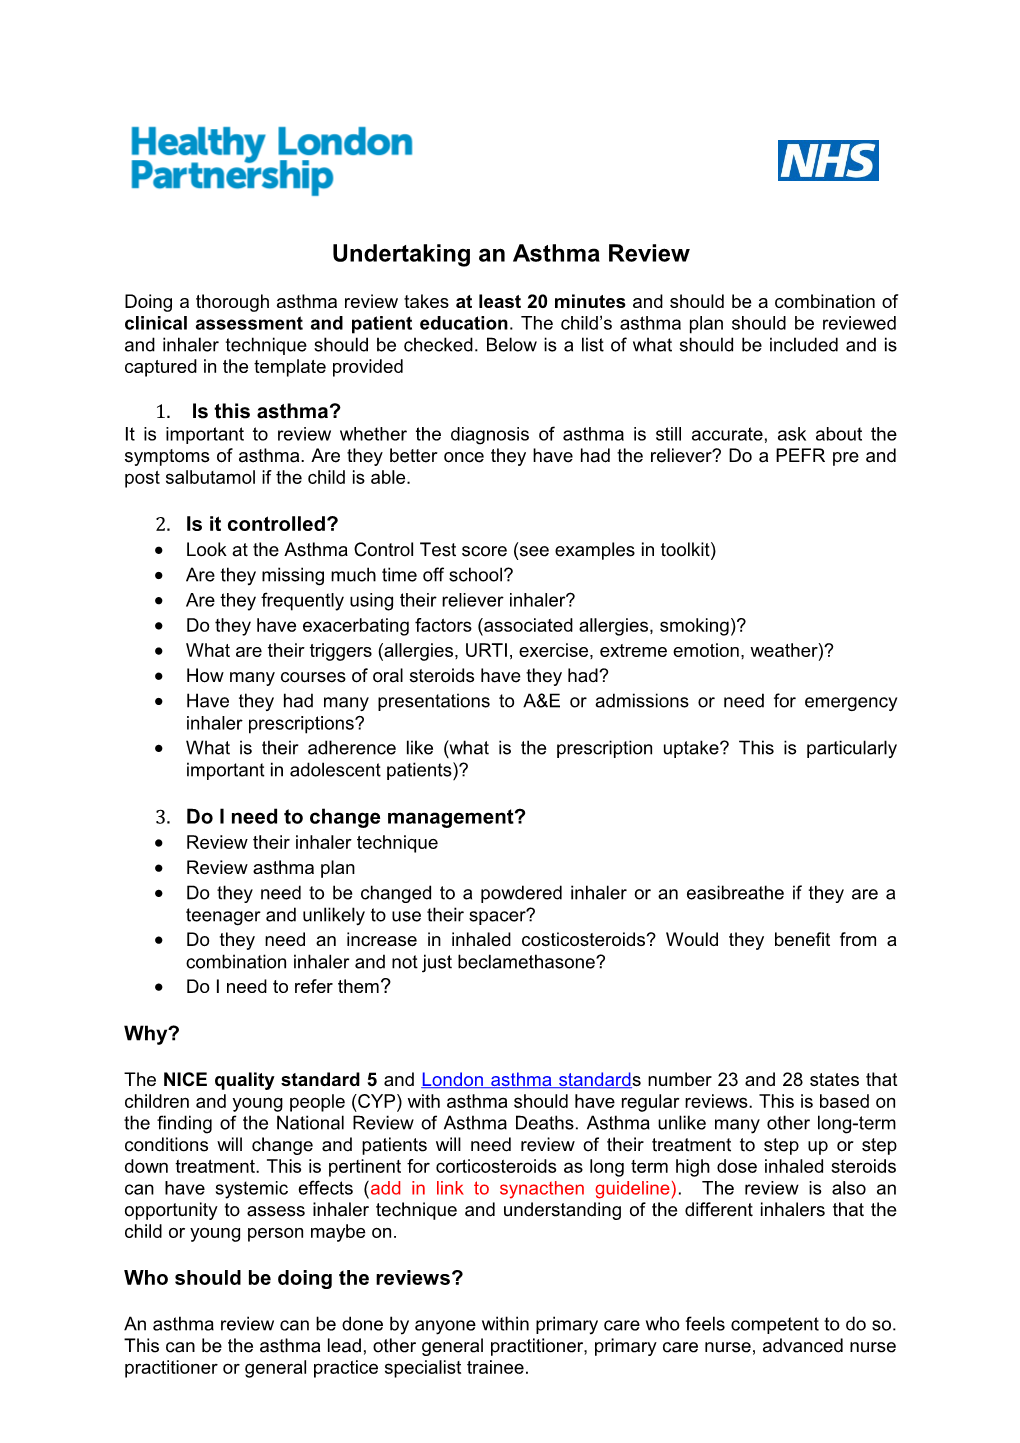 Undertaking an Asthma Review